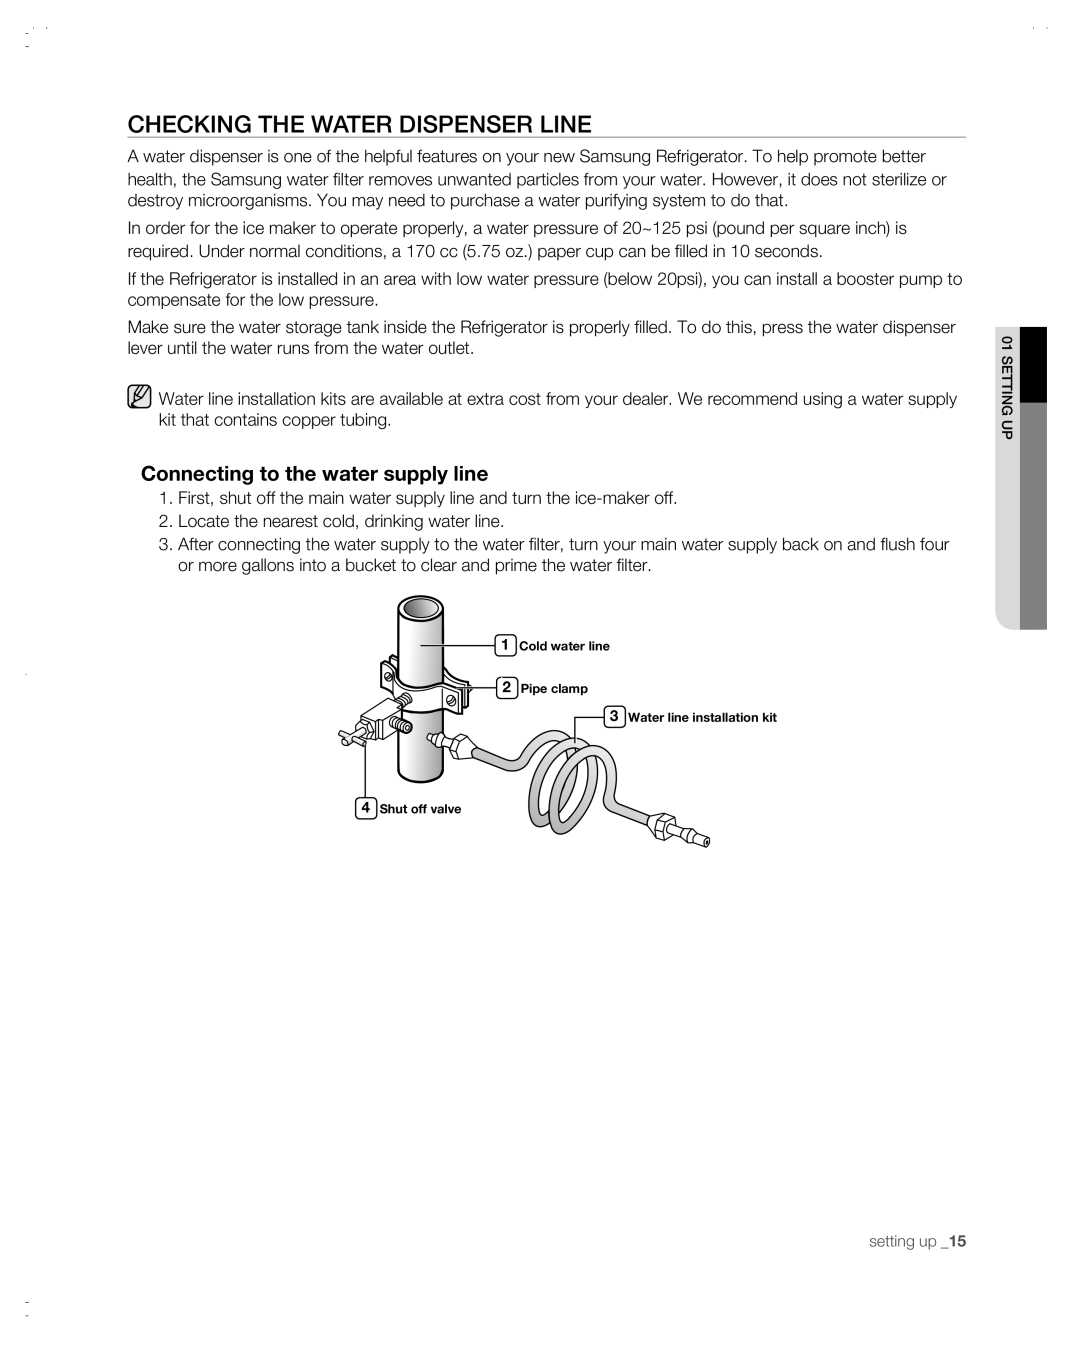 Samsung RSG257AABP user manual CHECKinG tHE wAtER DisPEnsER LinE, Connecting to the water supply line 